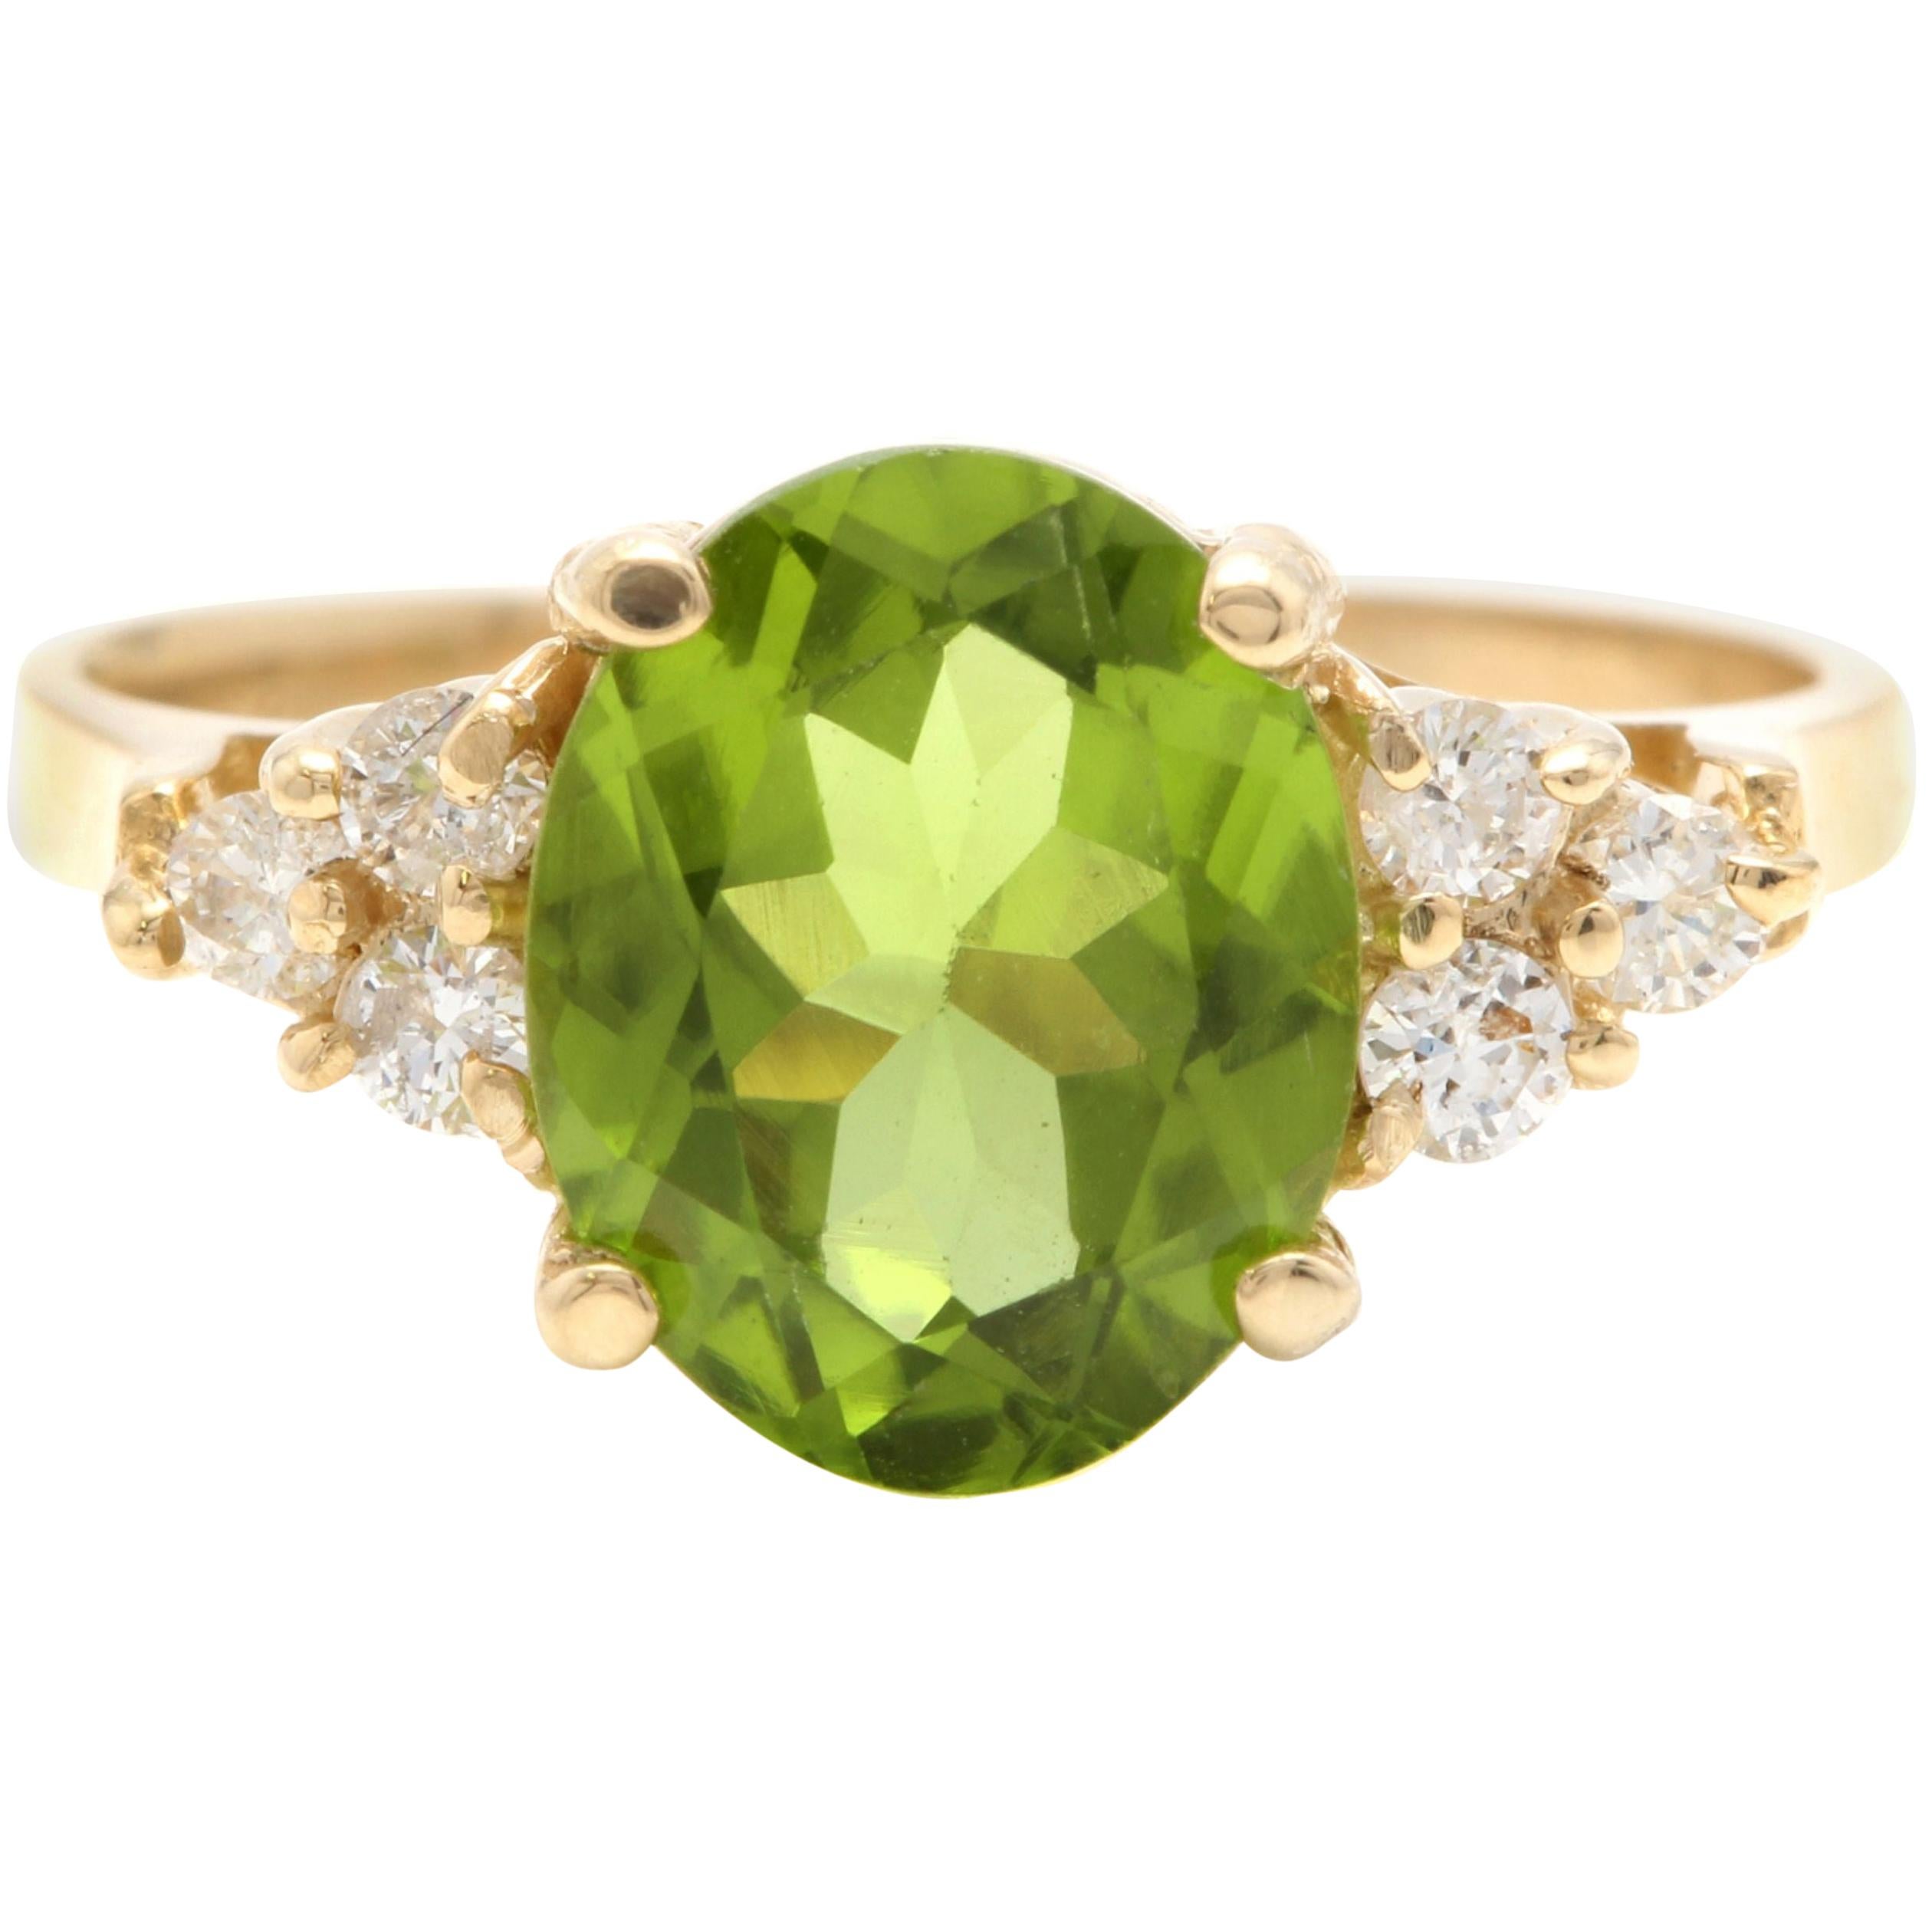 14k Gold Oval Green Peridot and Diamond Fashion Cocktail Anniversary Ring ctw 5 x 3 MM 0.19 Carat